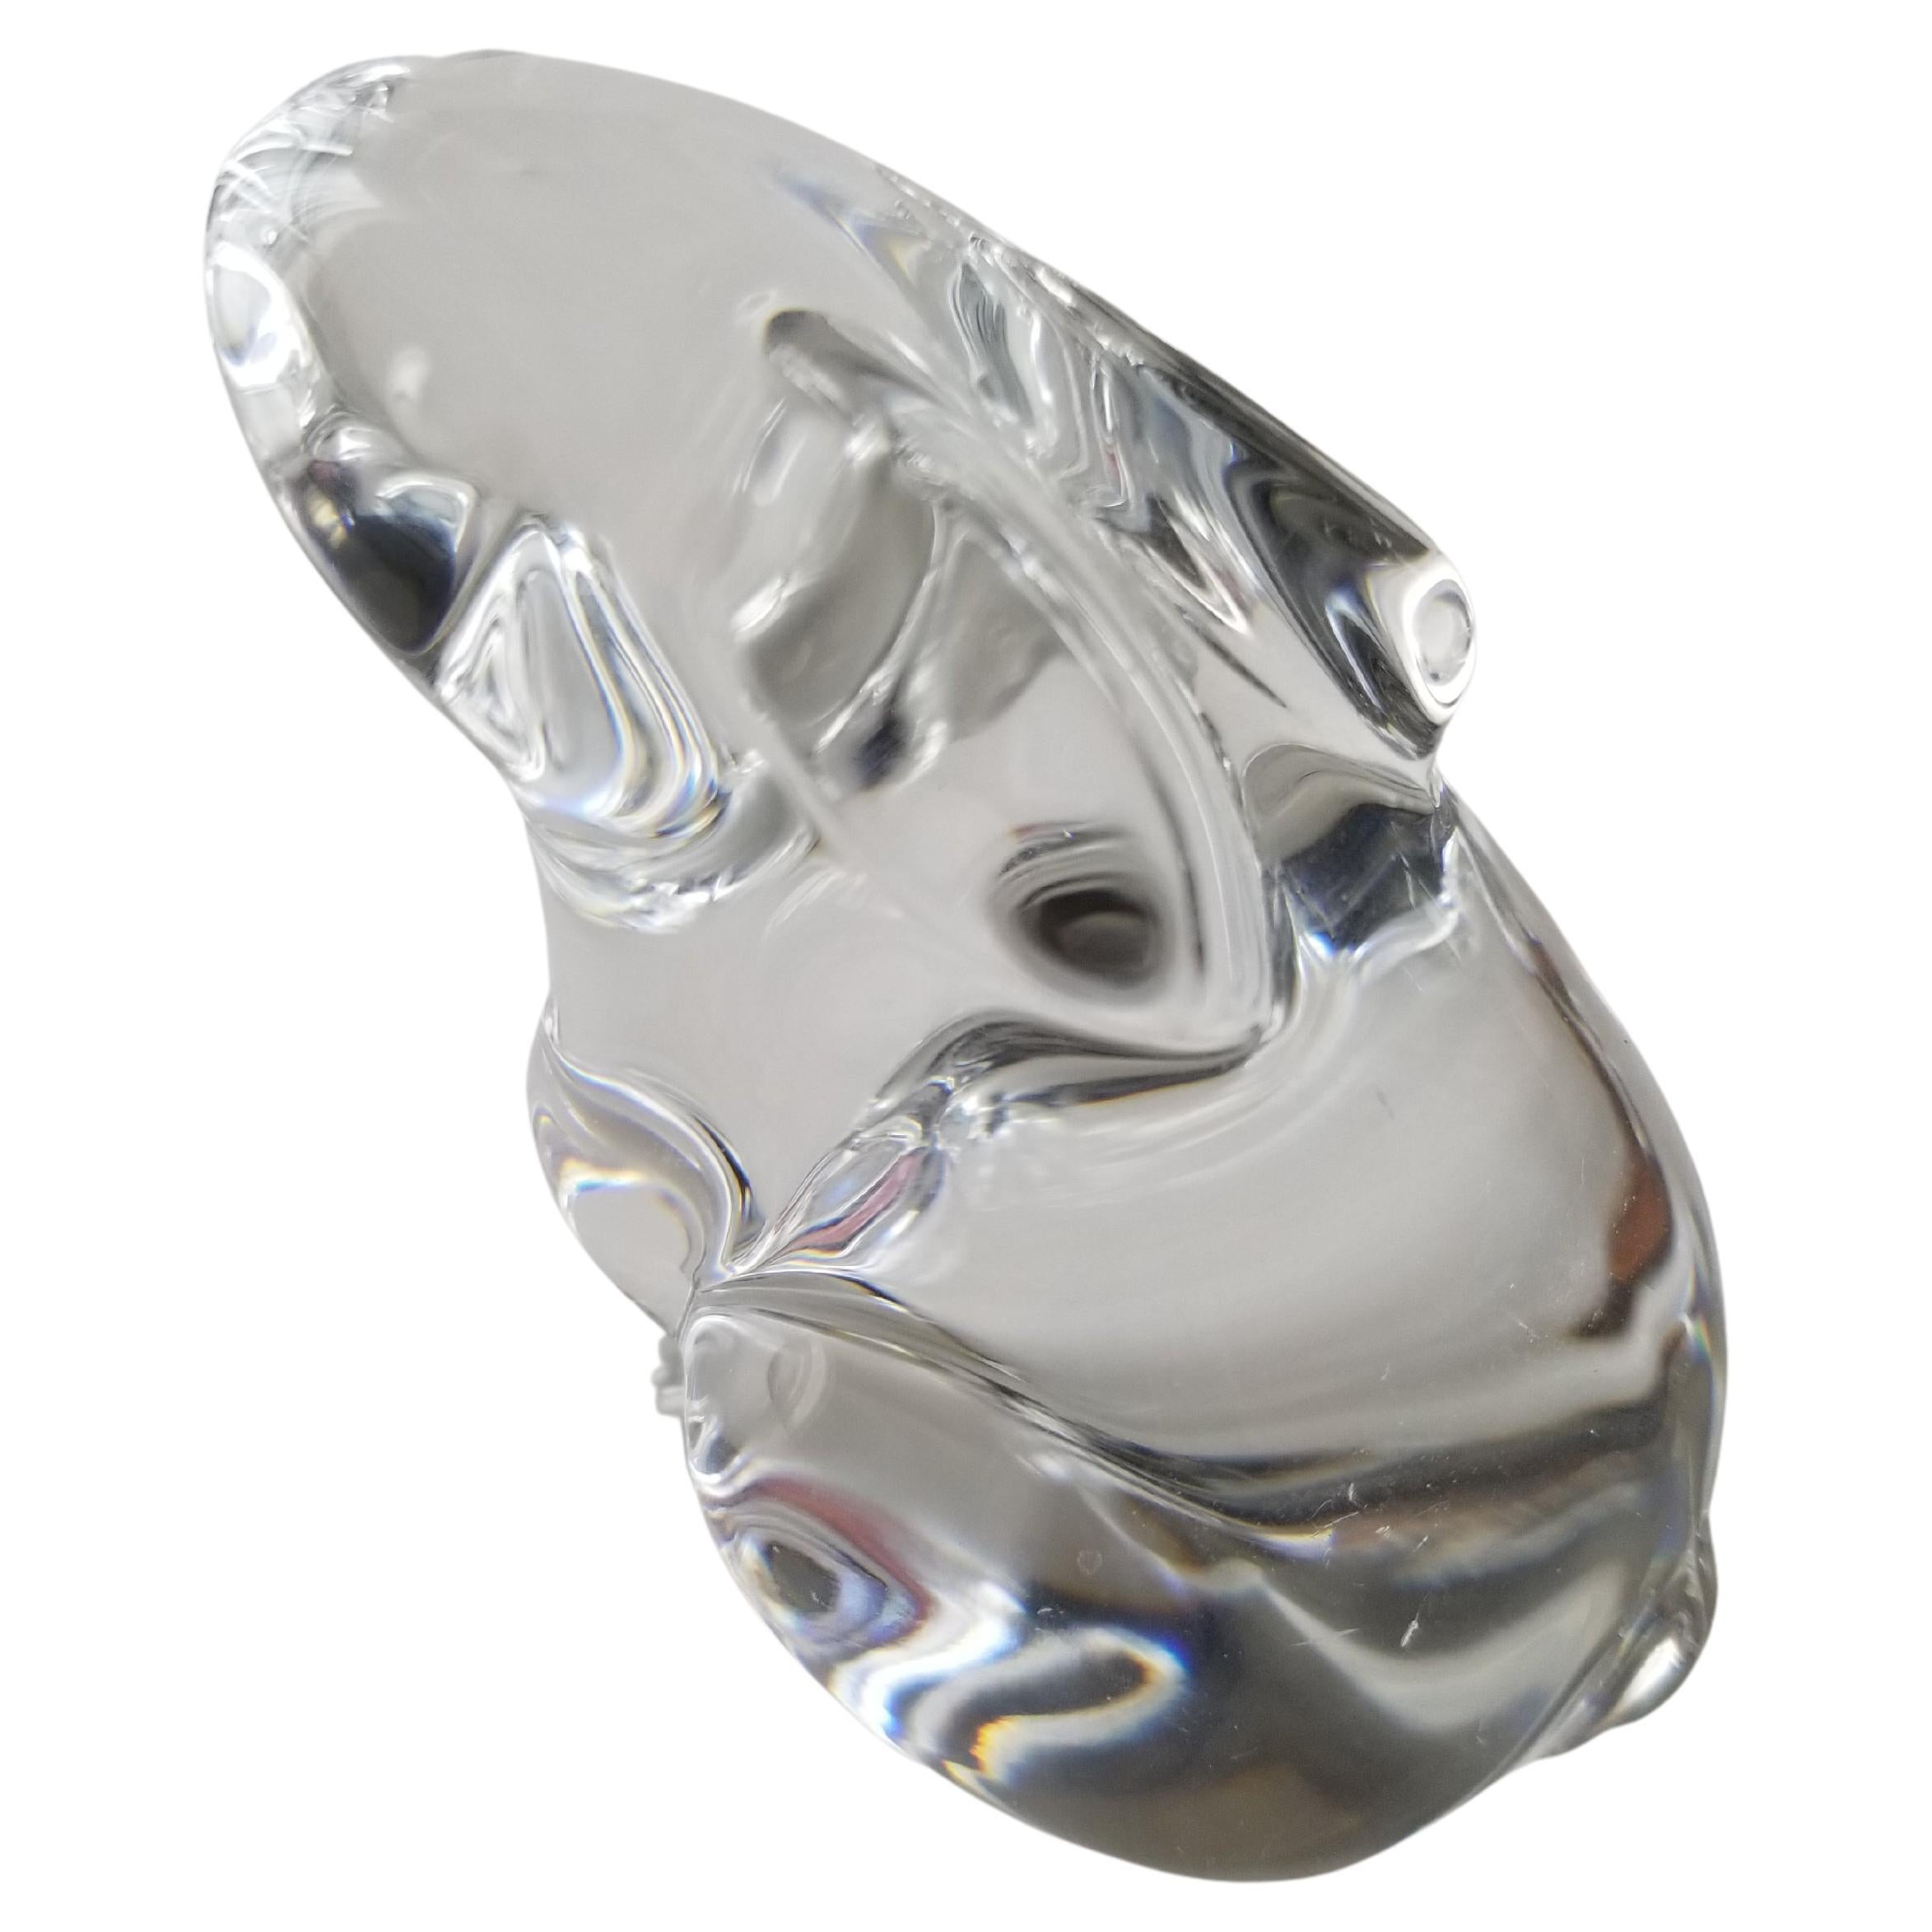 Paperweight
Precious 1980s France Baccarat bunny rabbit paperweight sculpture 
French crystal glass
approximately 3.25 H 2 W 3 D.
Signed by Baccarat
Preowned original vintage good condition.
See images provided.